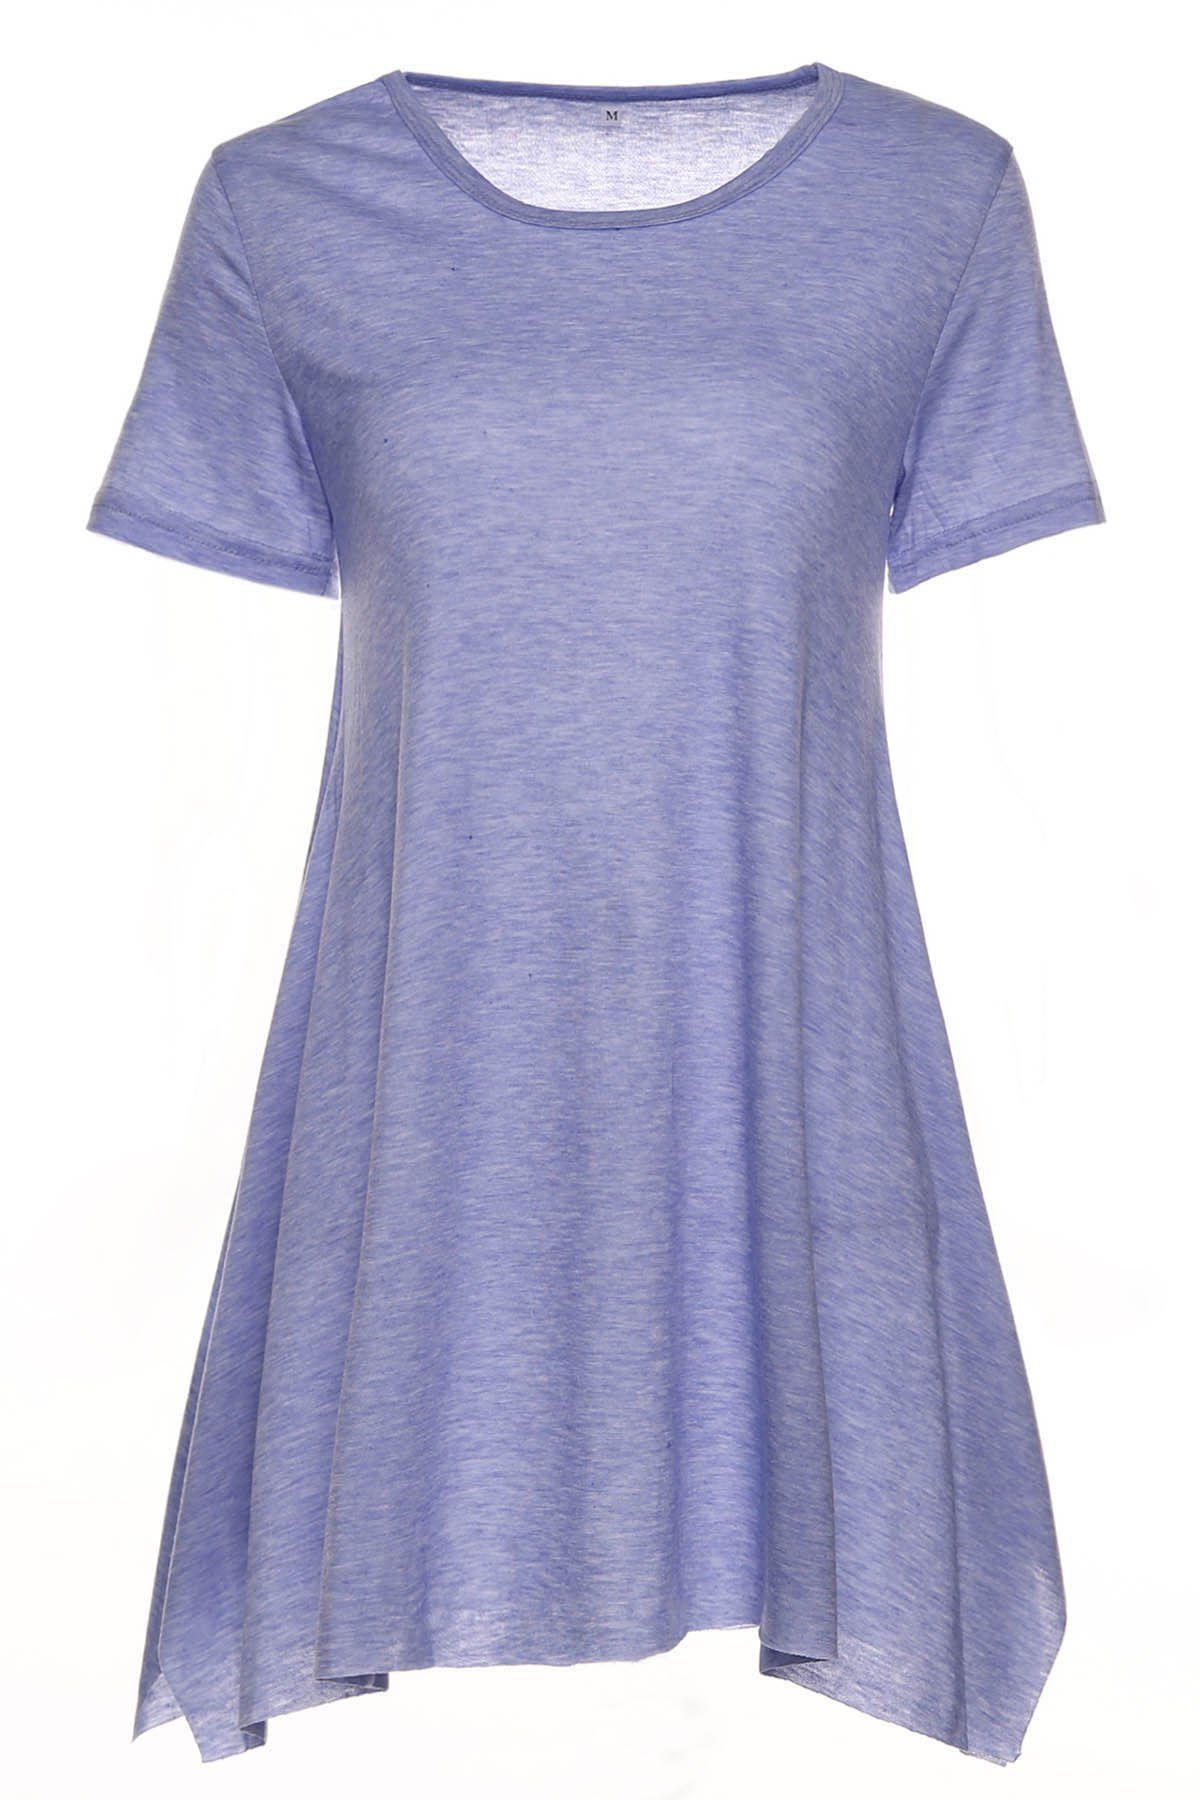 Trandy Short Sleeve Pure Color Dress For Women, BLUE, S in Casual ...